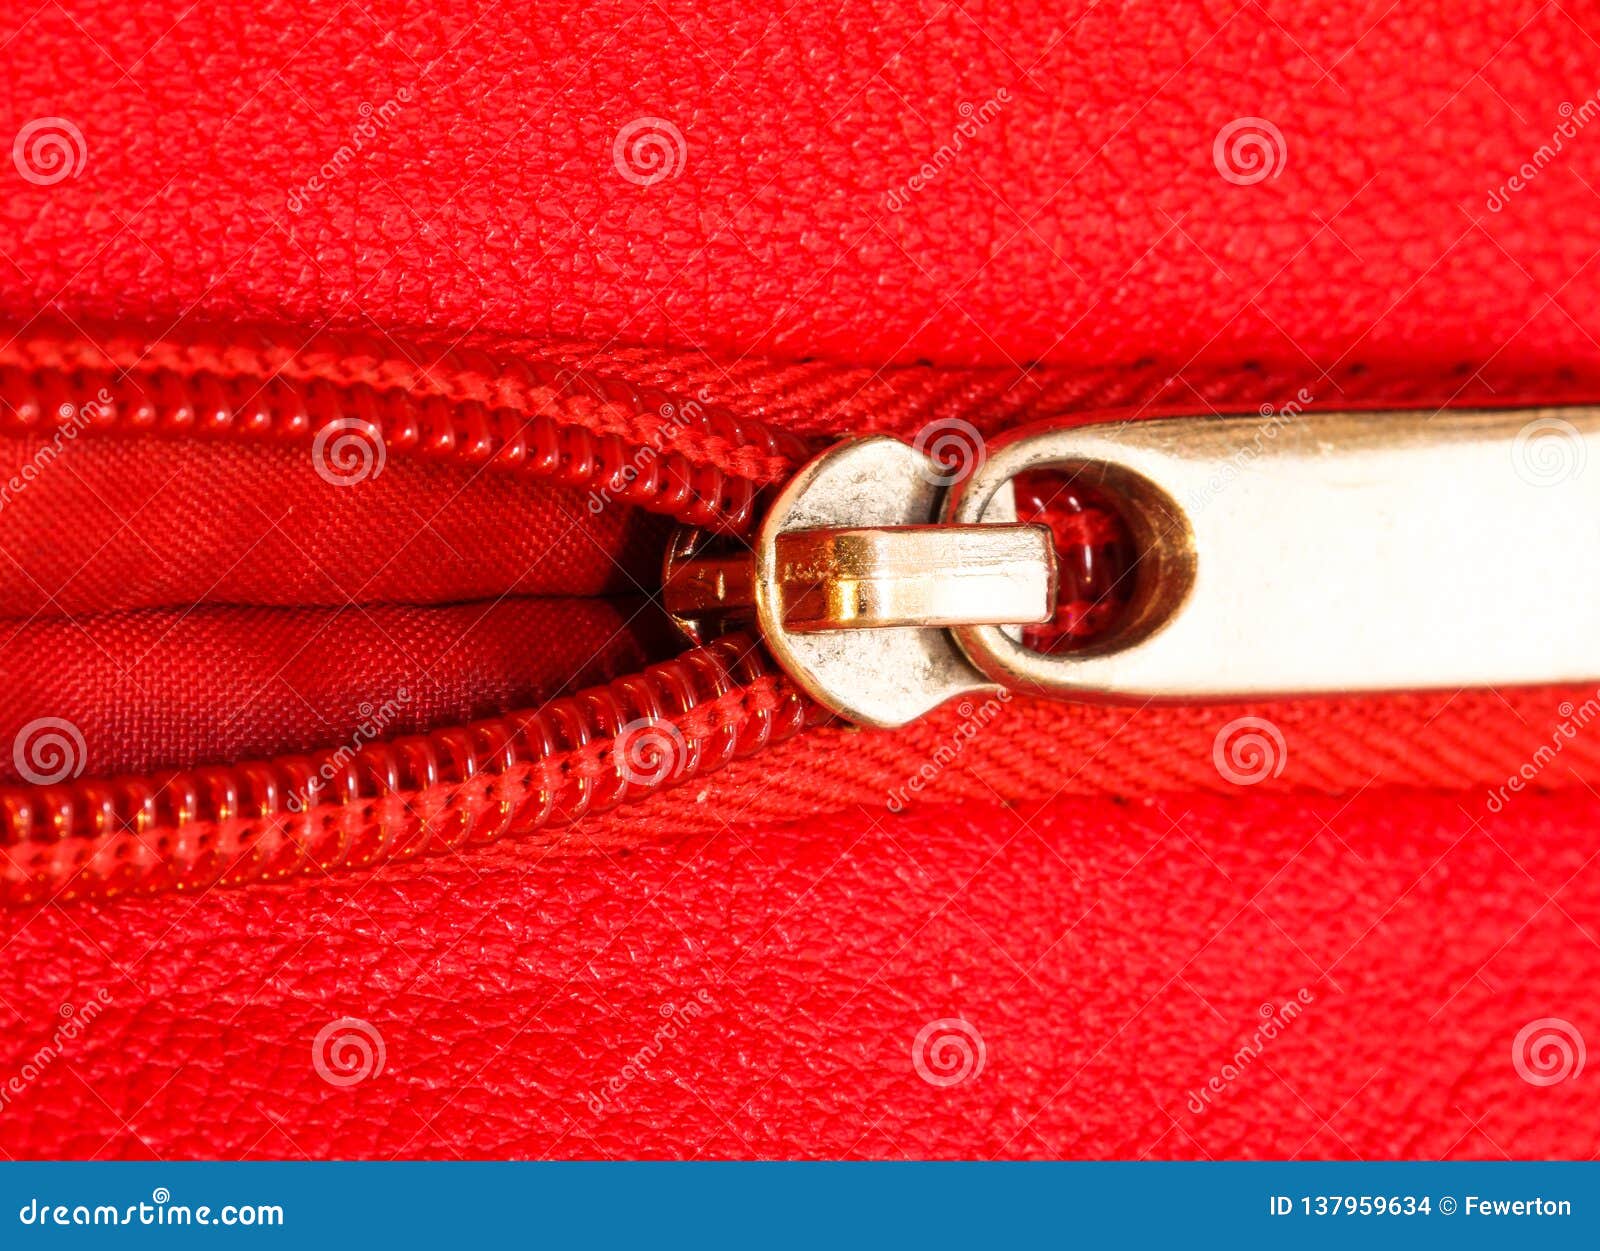 Metal Zipper on Intense Red Leather Jacket or Purse Detail Close Up ...